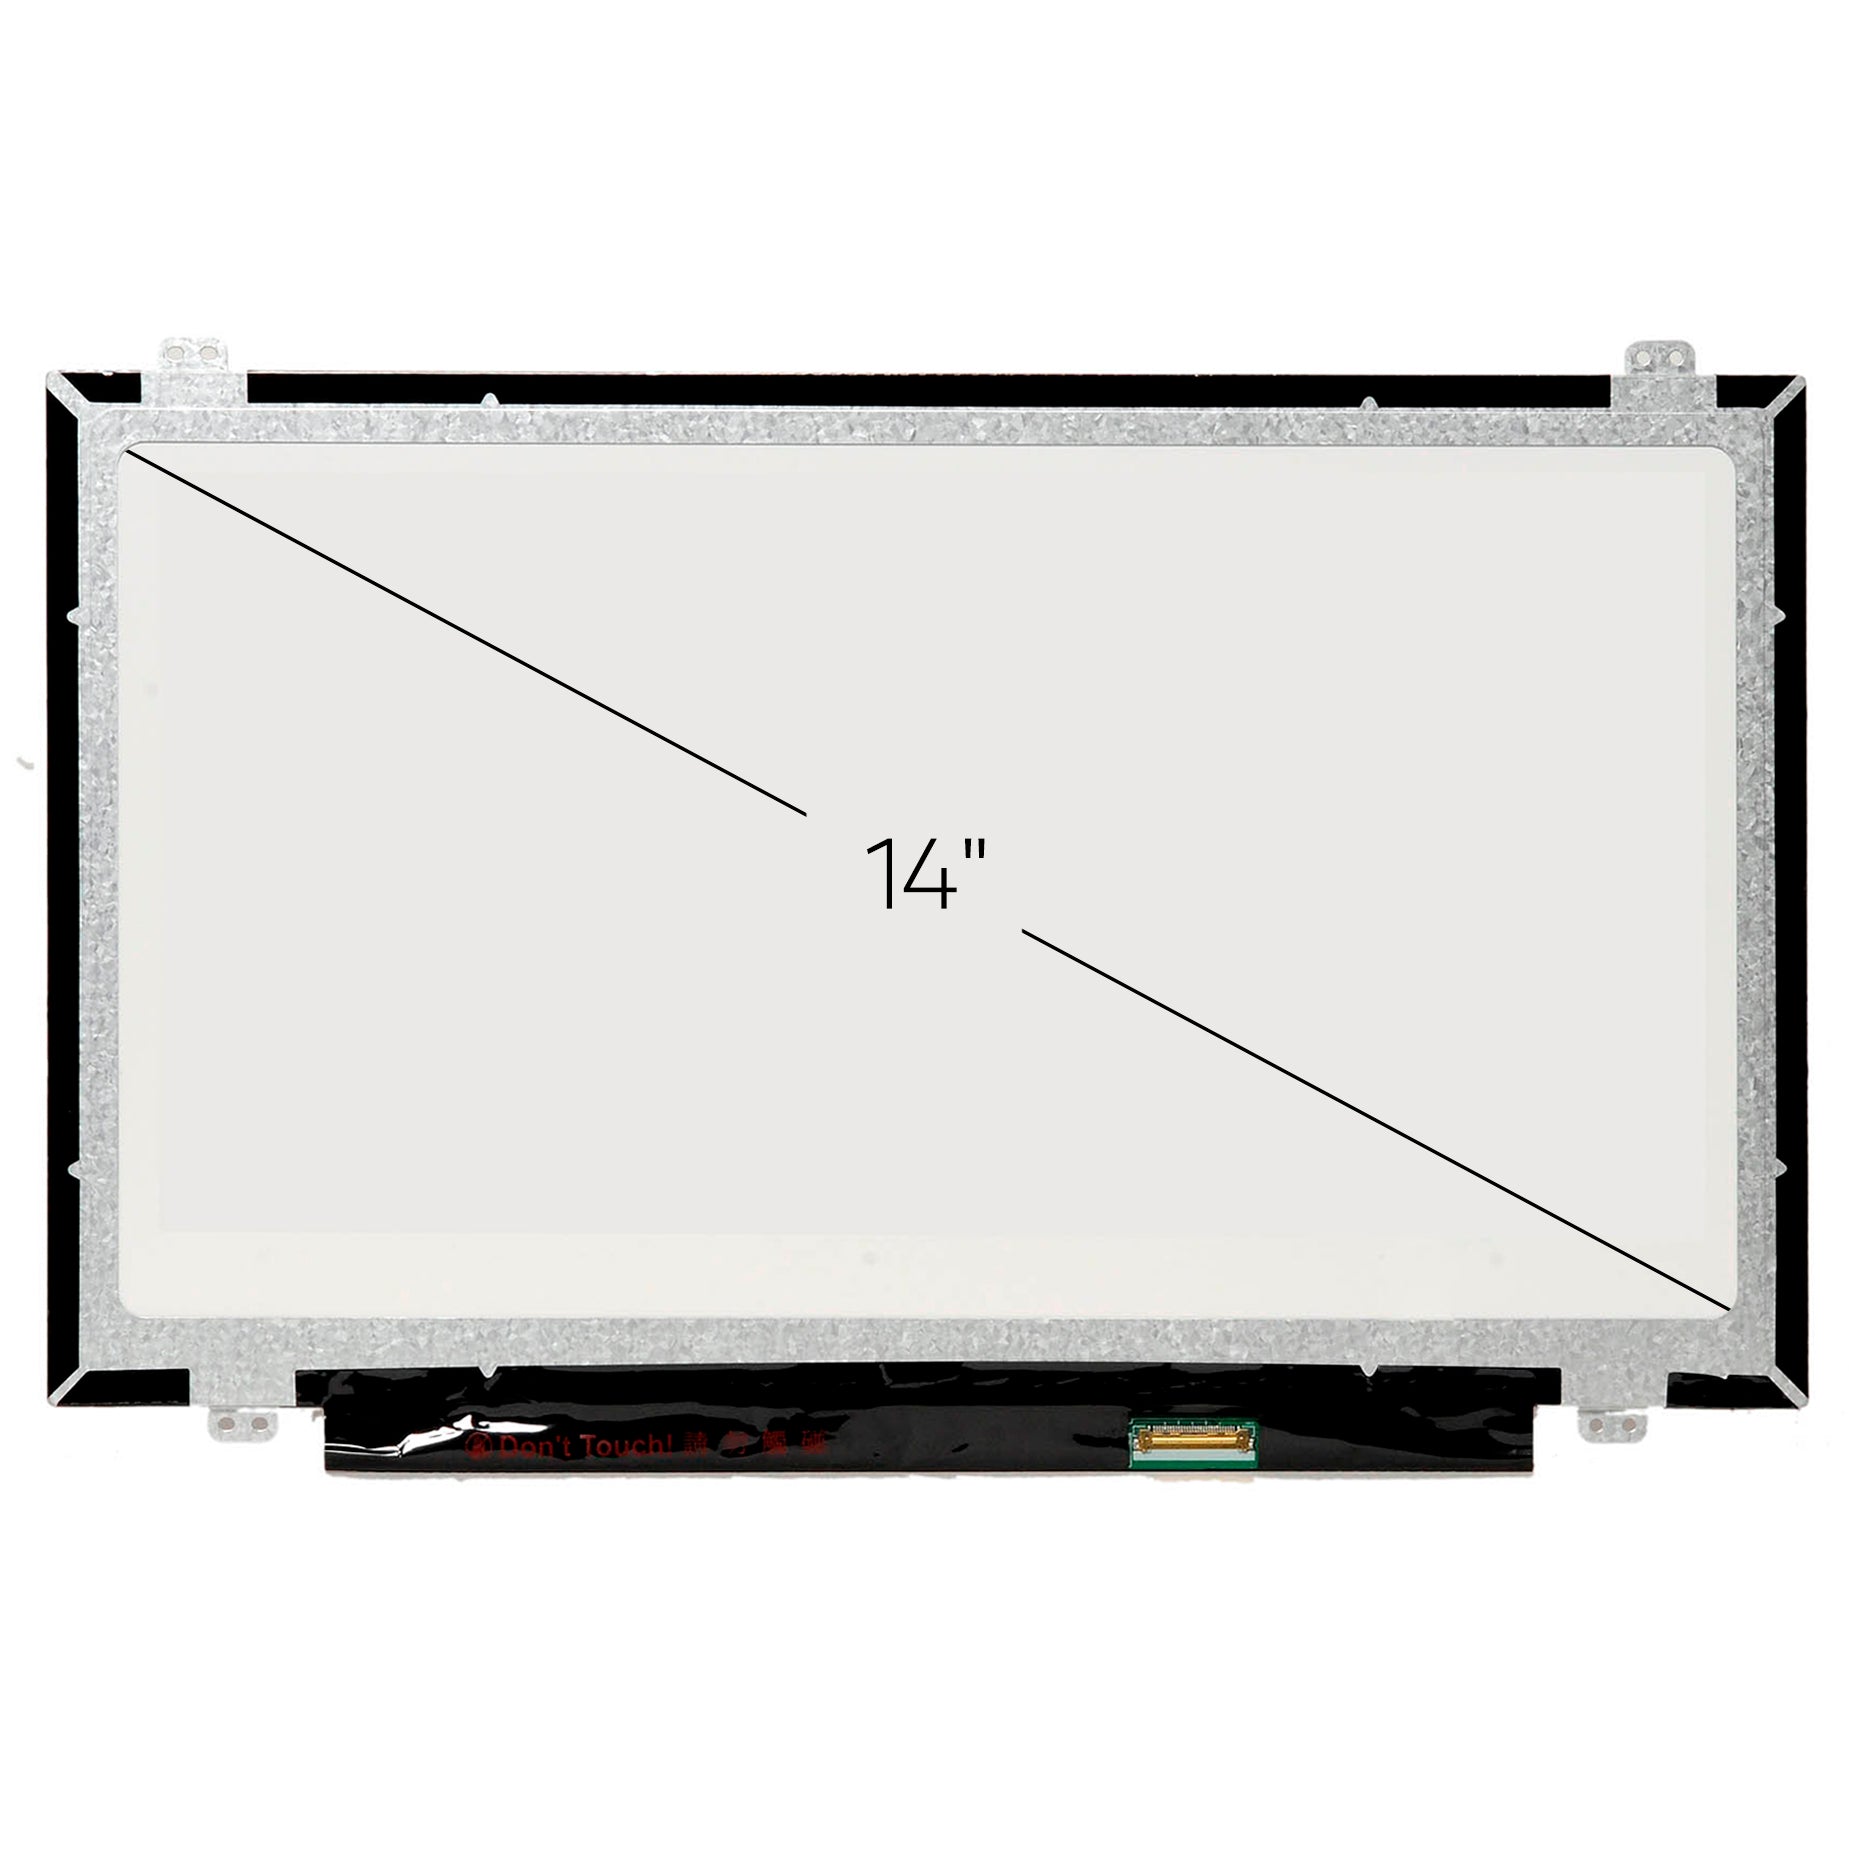 Screen Replacement for LP140WHU(TP)(E1) HD 1366x768 Glossy LCD LED Display